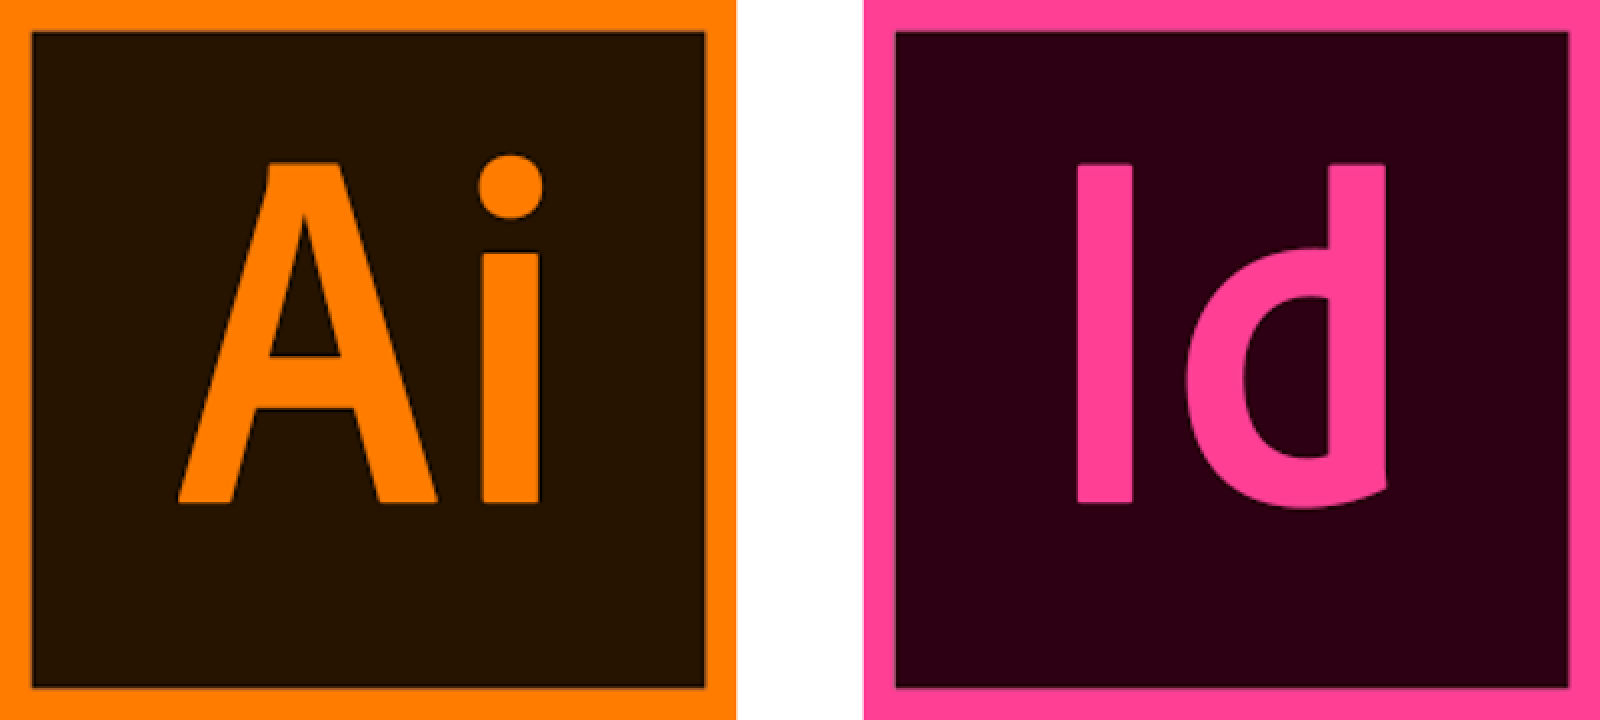 Adobe InDesign Logo - Adobe Indesign Logo Png (89+ images in Collection) Page 2